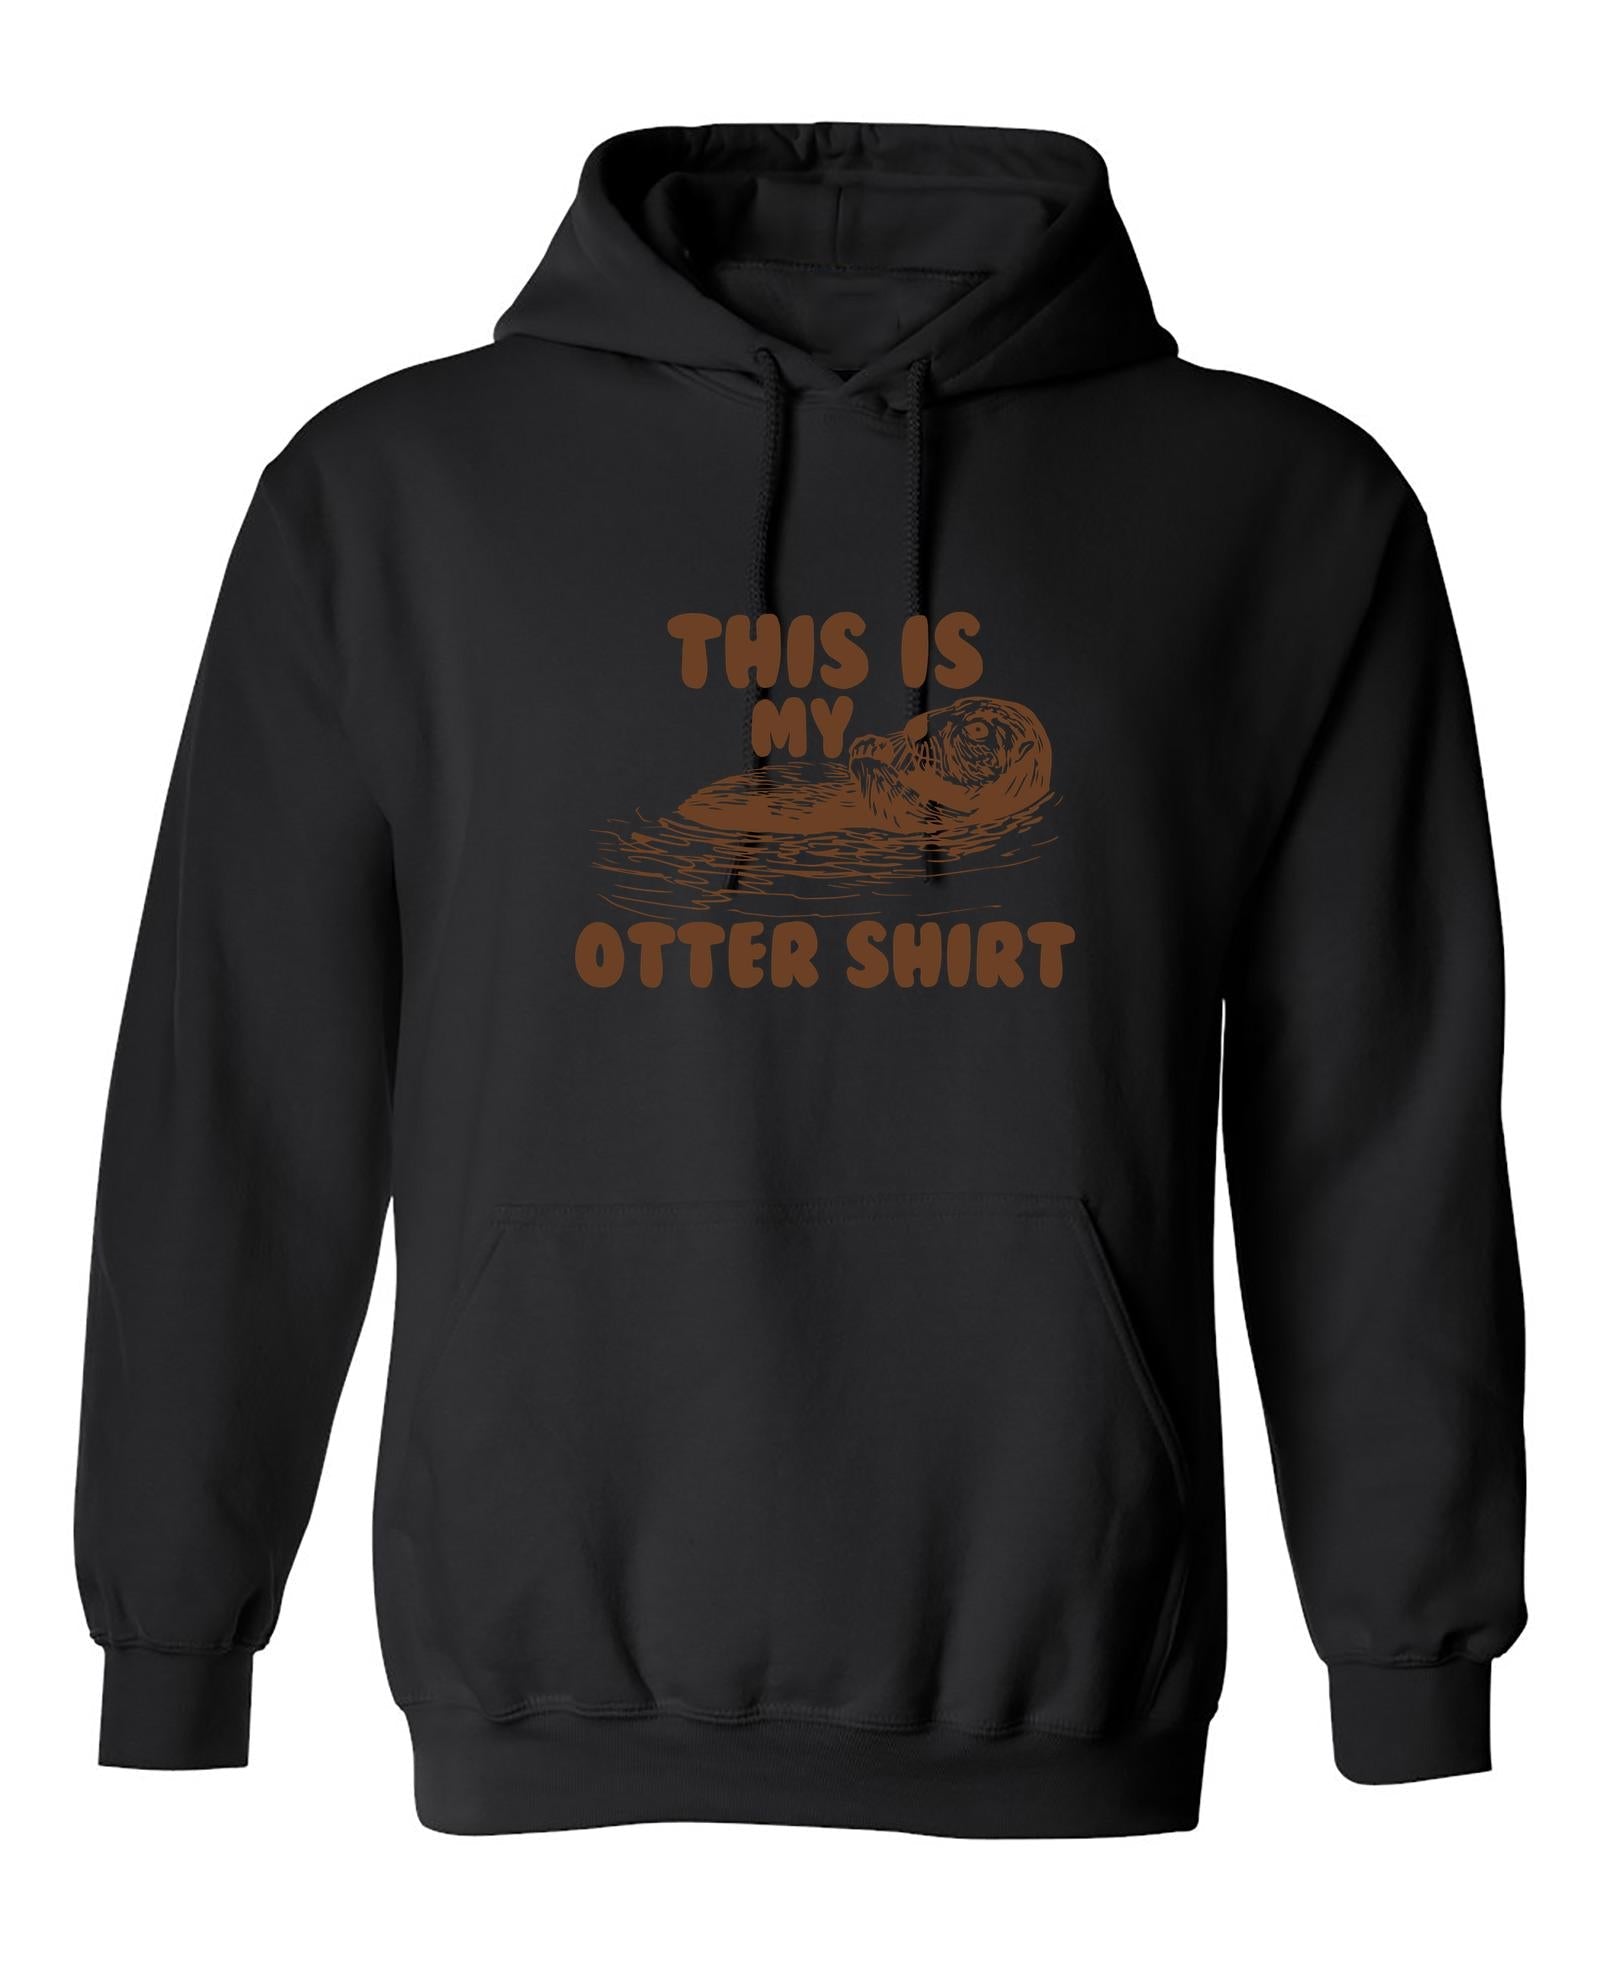 Funny T-Shirts design "This Is My Otter Shirt"